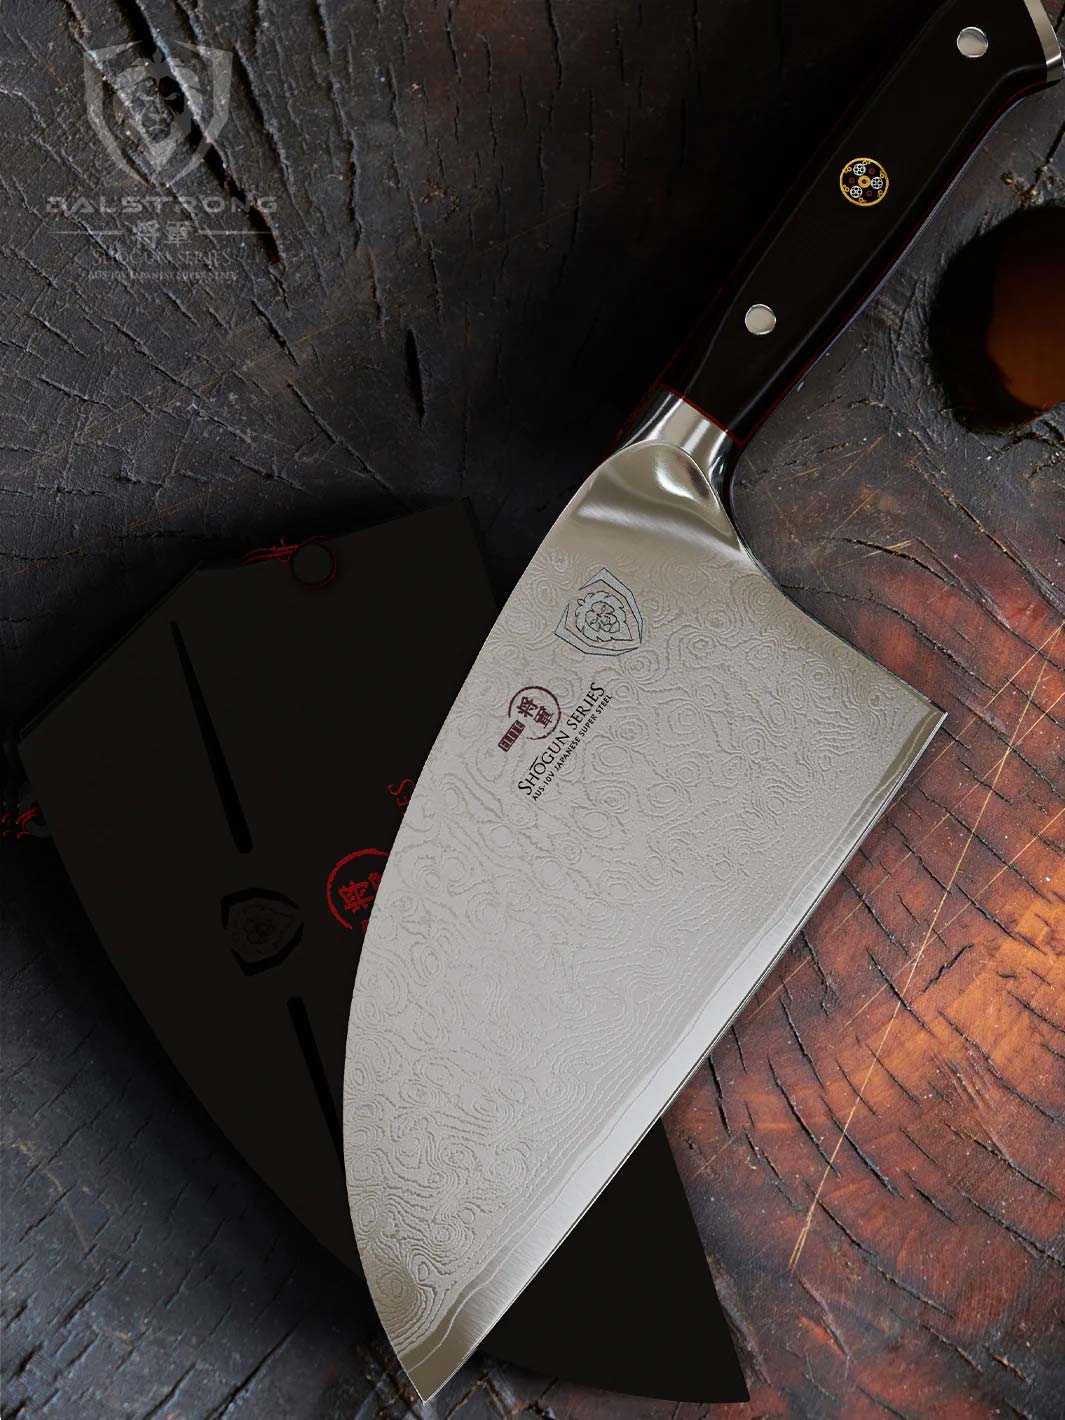 Dalstrong shogun series 8 inch serbian chef knife with black handle and sheath on a wooden board.